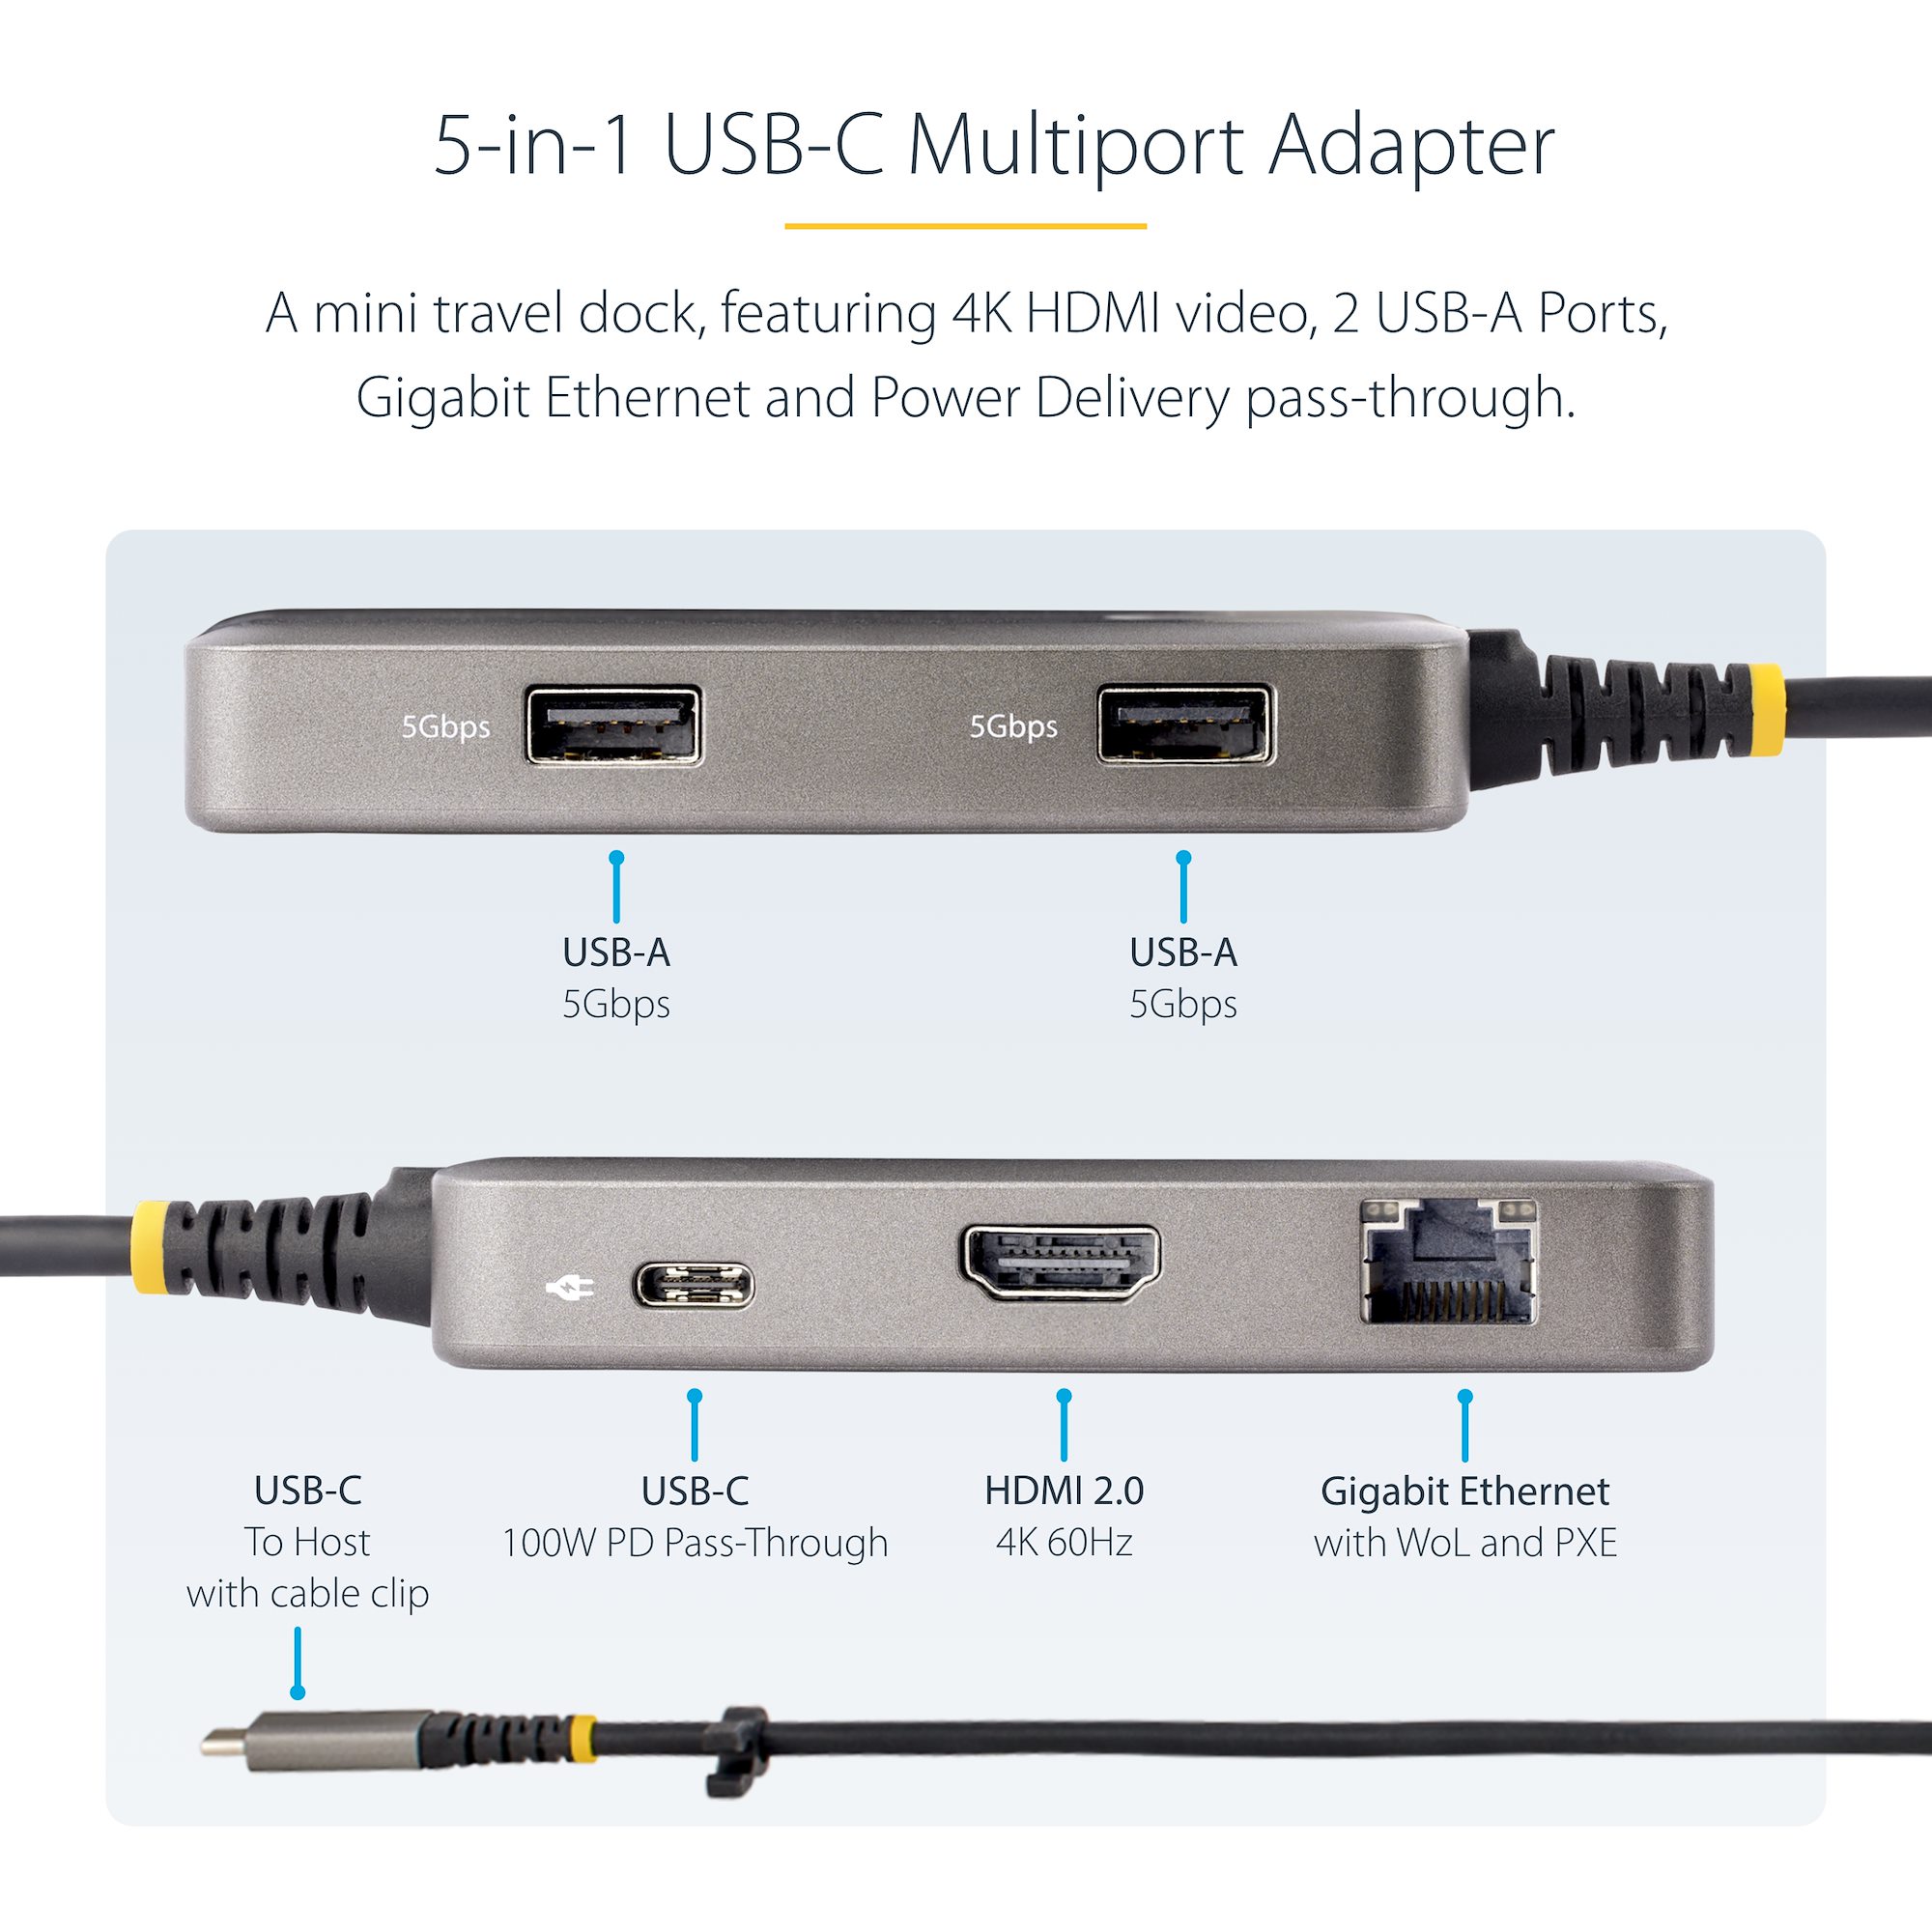 USB-C Multiport Adapter, 4K 60Hz HDMI, HDR - 2-Port 5Gbps USB 3.0 Hub, 100W  Power Delivery Pass-Through, GbE, USB Type C Mini Docking Station